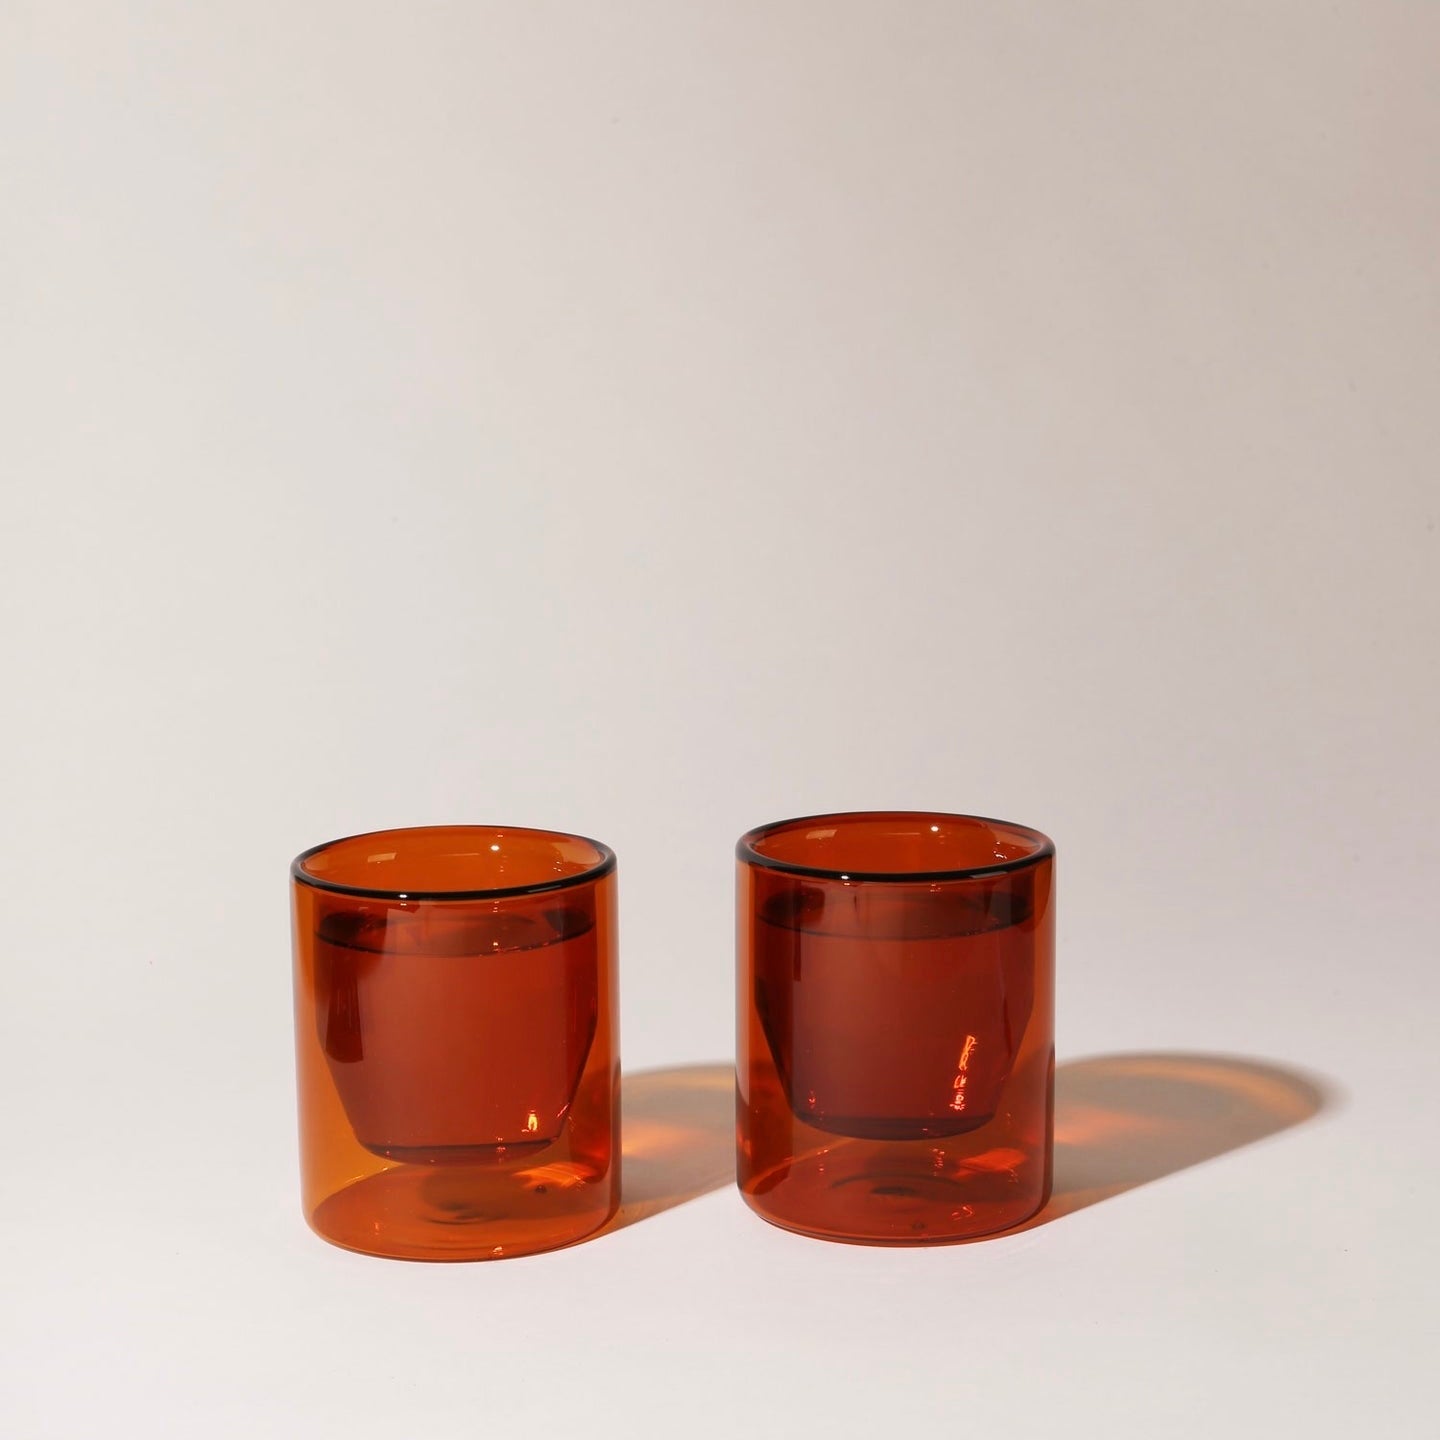 Double Walled Glassware